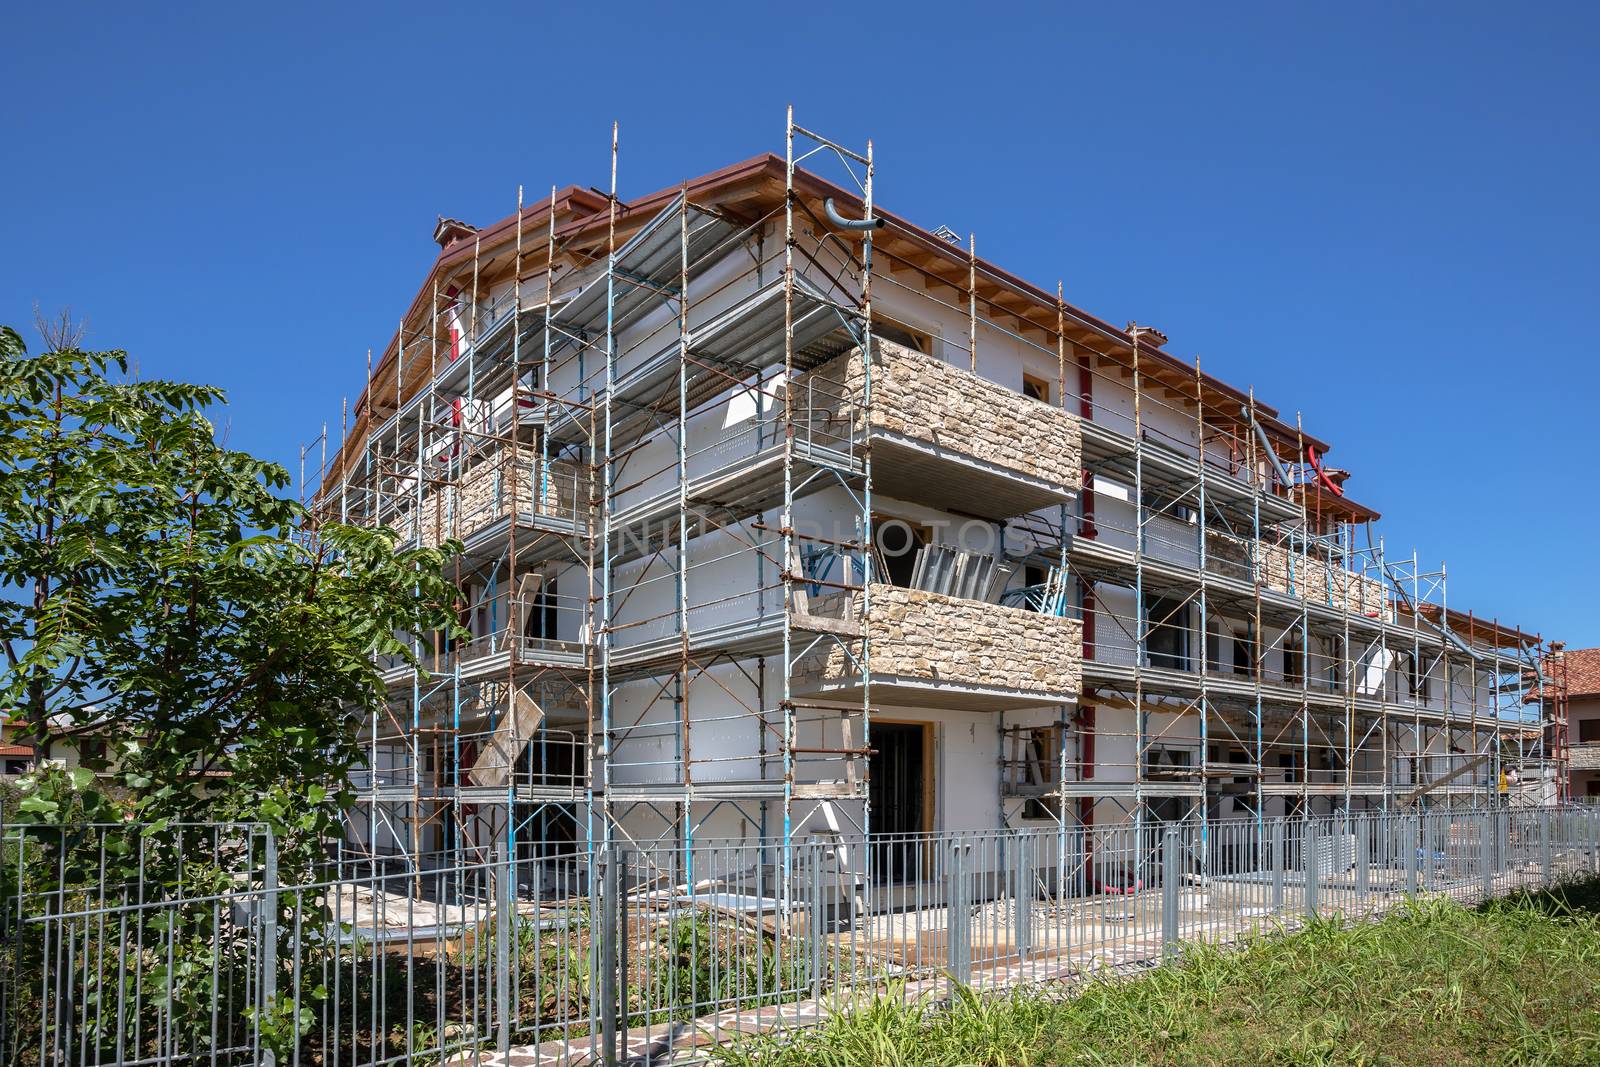 Scaffolding near a house under construction for external plaster works. Modern apartment building in city with stone balconies.